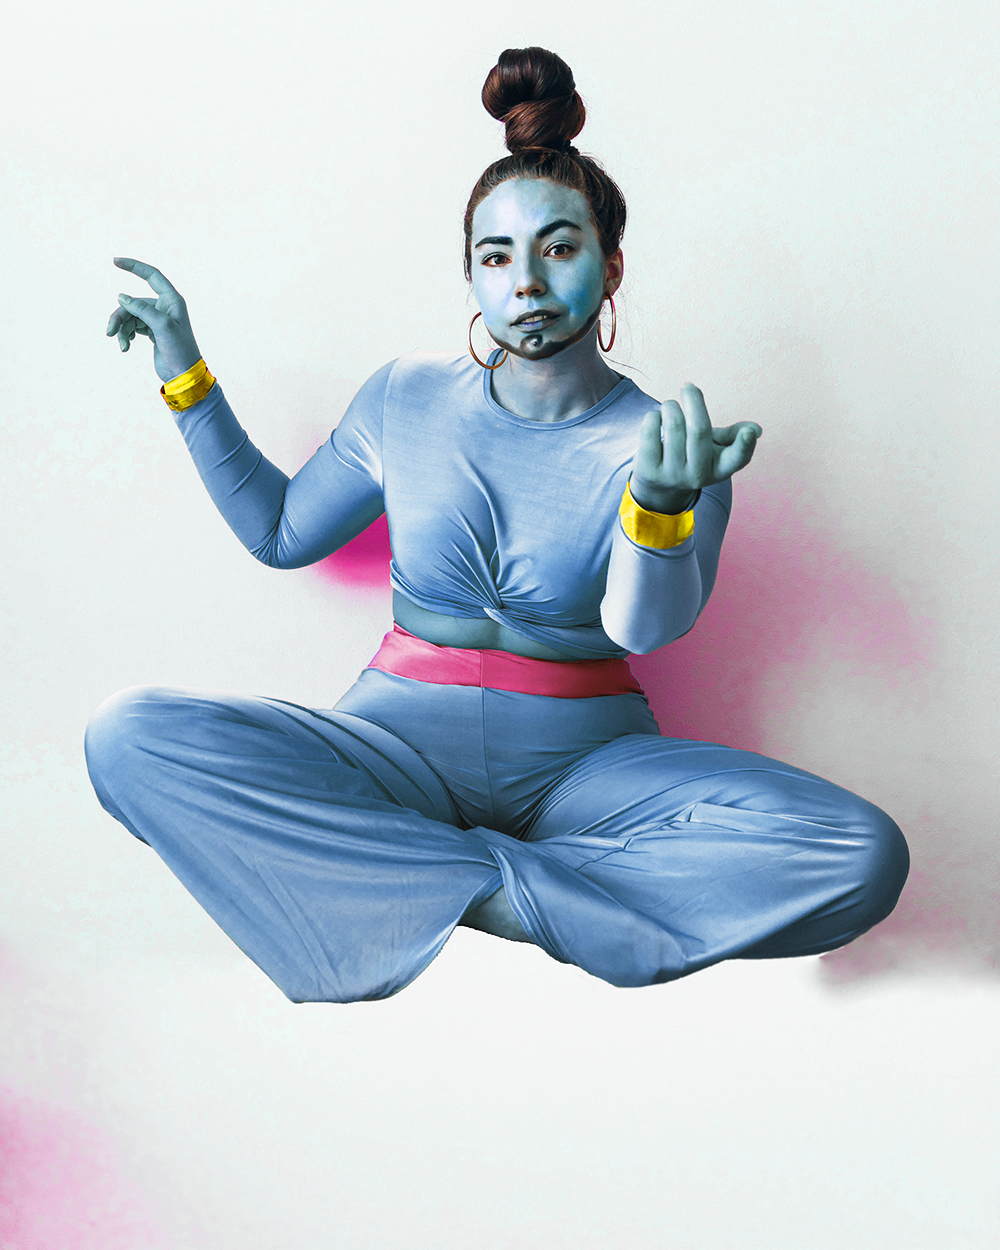 A funny DIY Halloween costume of Genie from Aladdin. ALl you need is some blue makeup and a blue outfit!